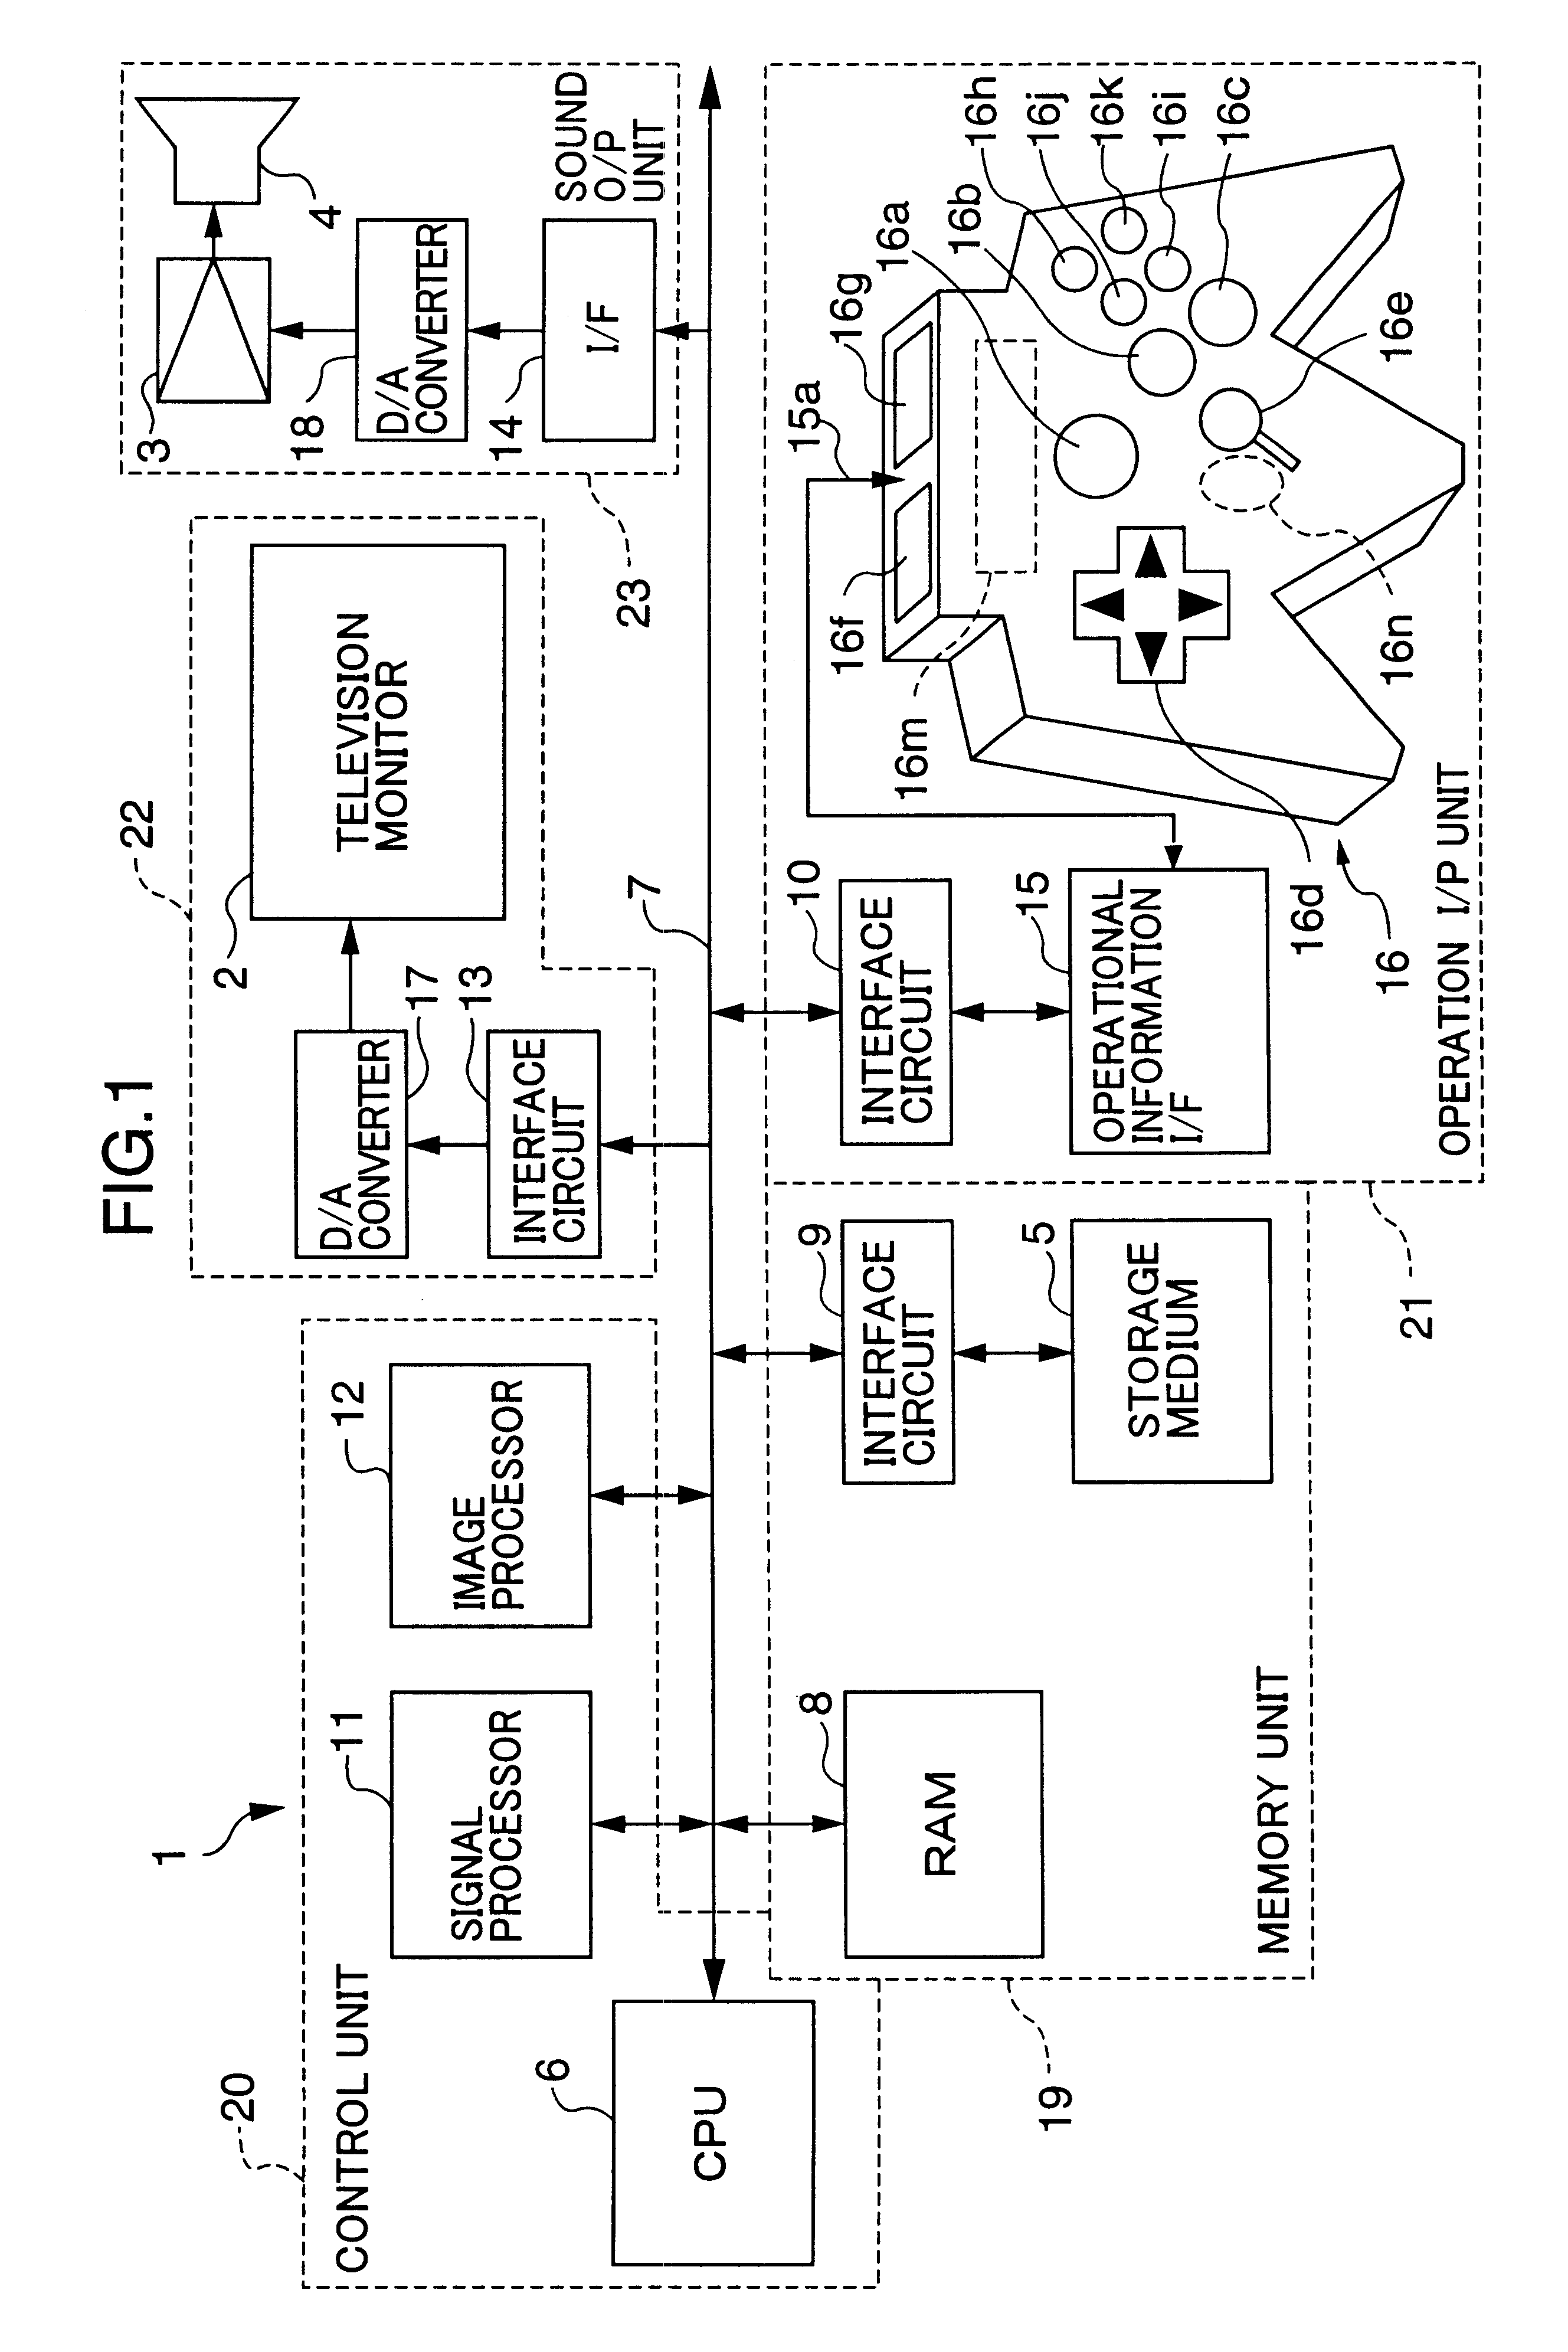 Animated image generating method and apparatus, readable storage medium storing animated image processing program and video game system